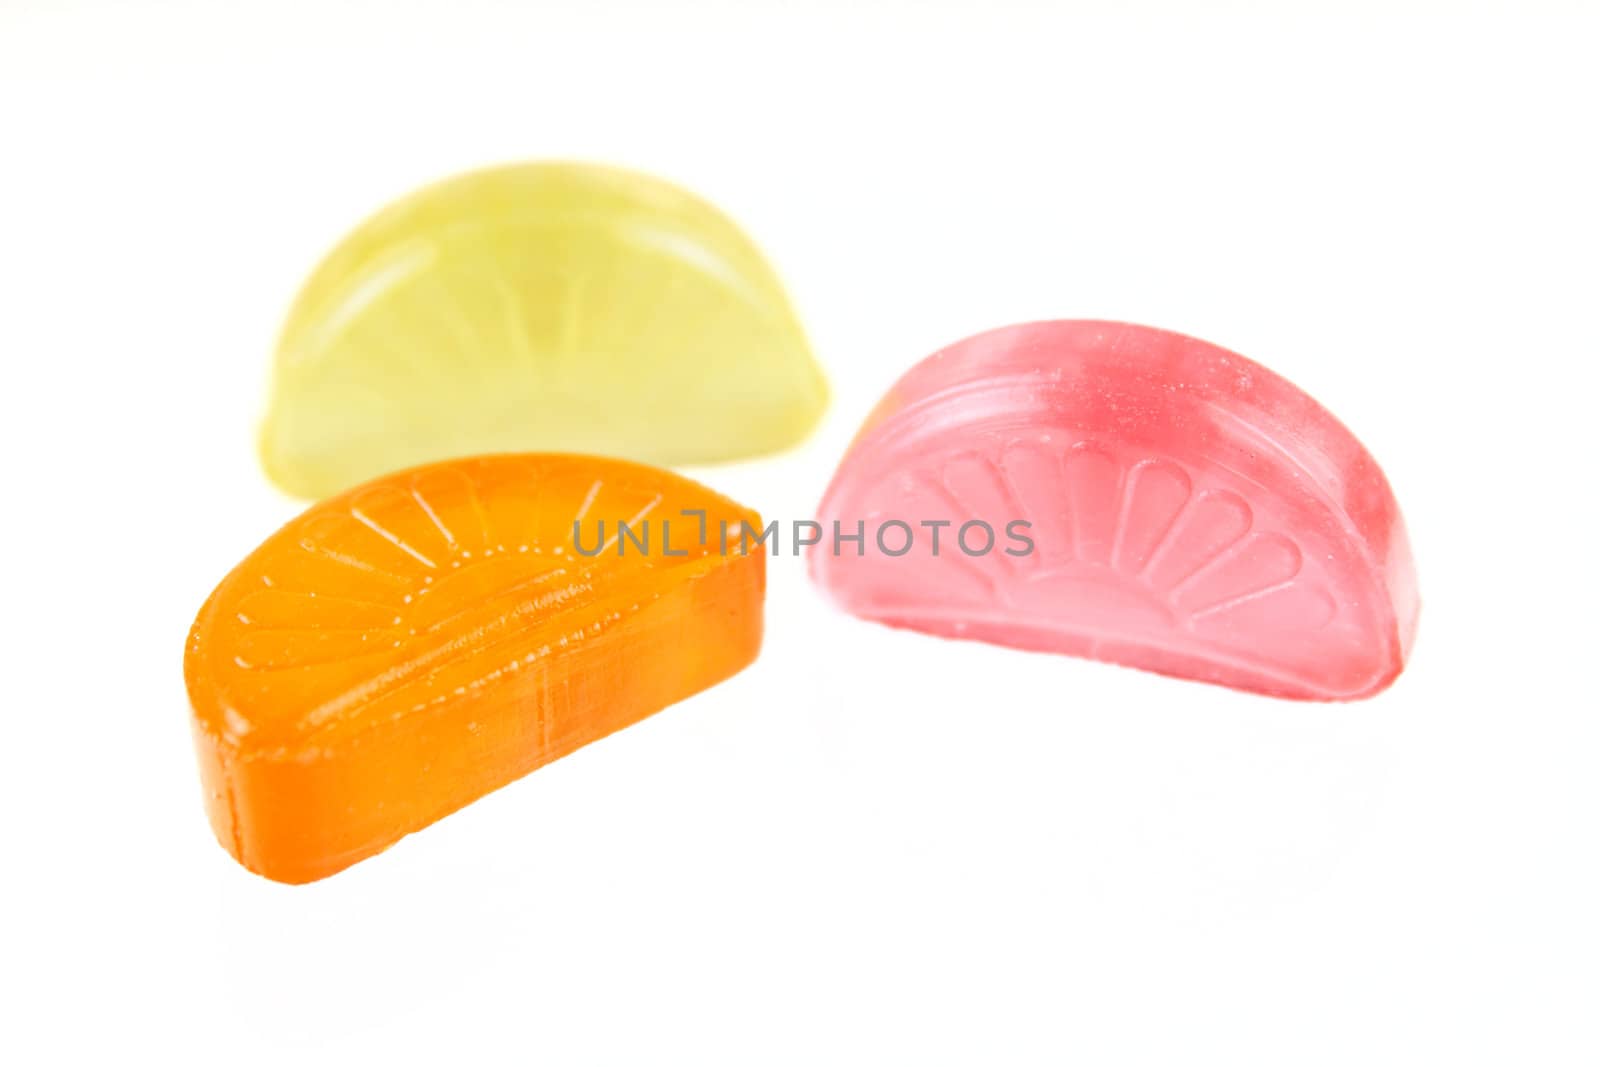 Red and yellow sugar candy removed on a white background close up